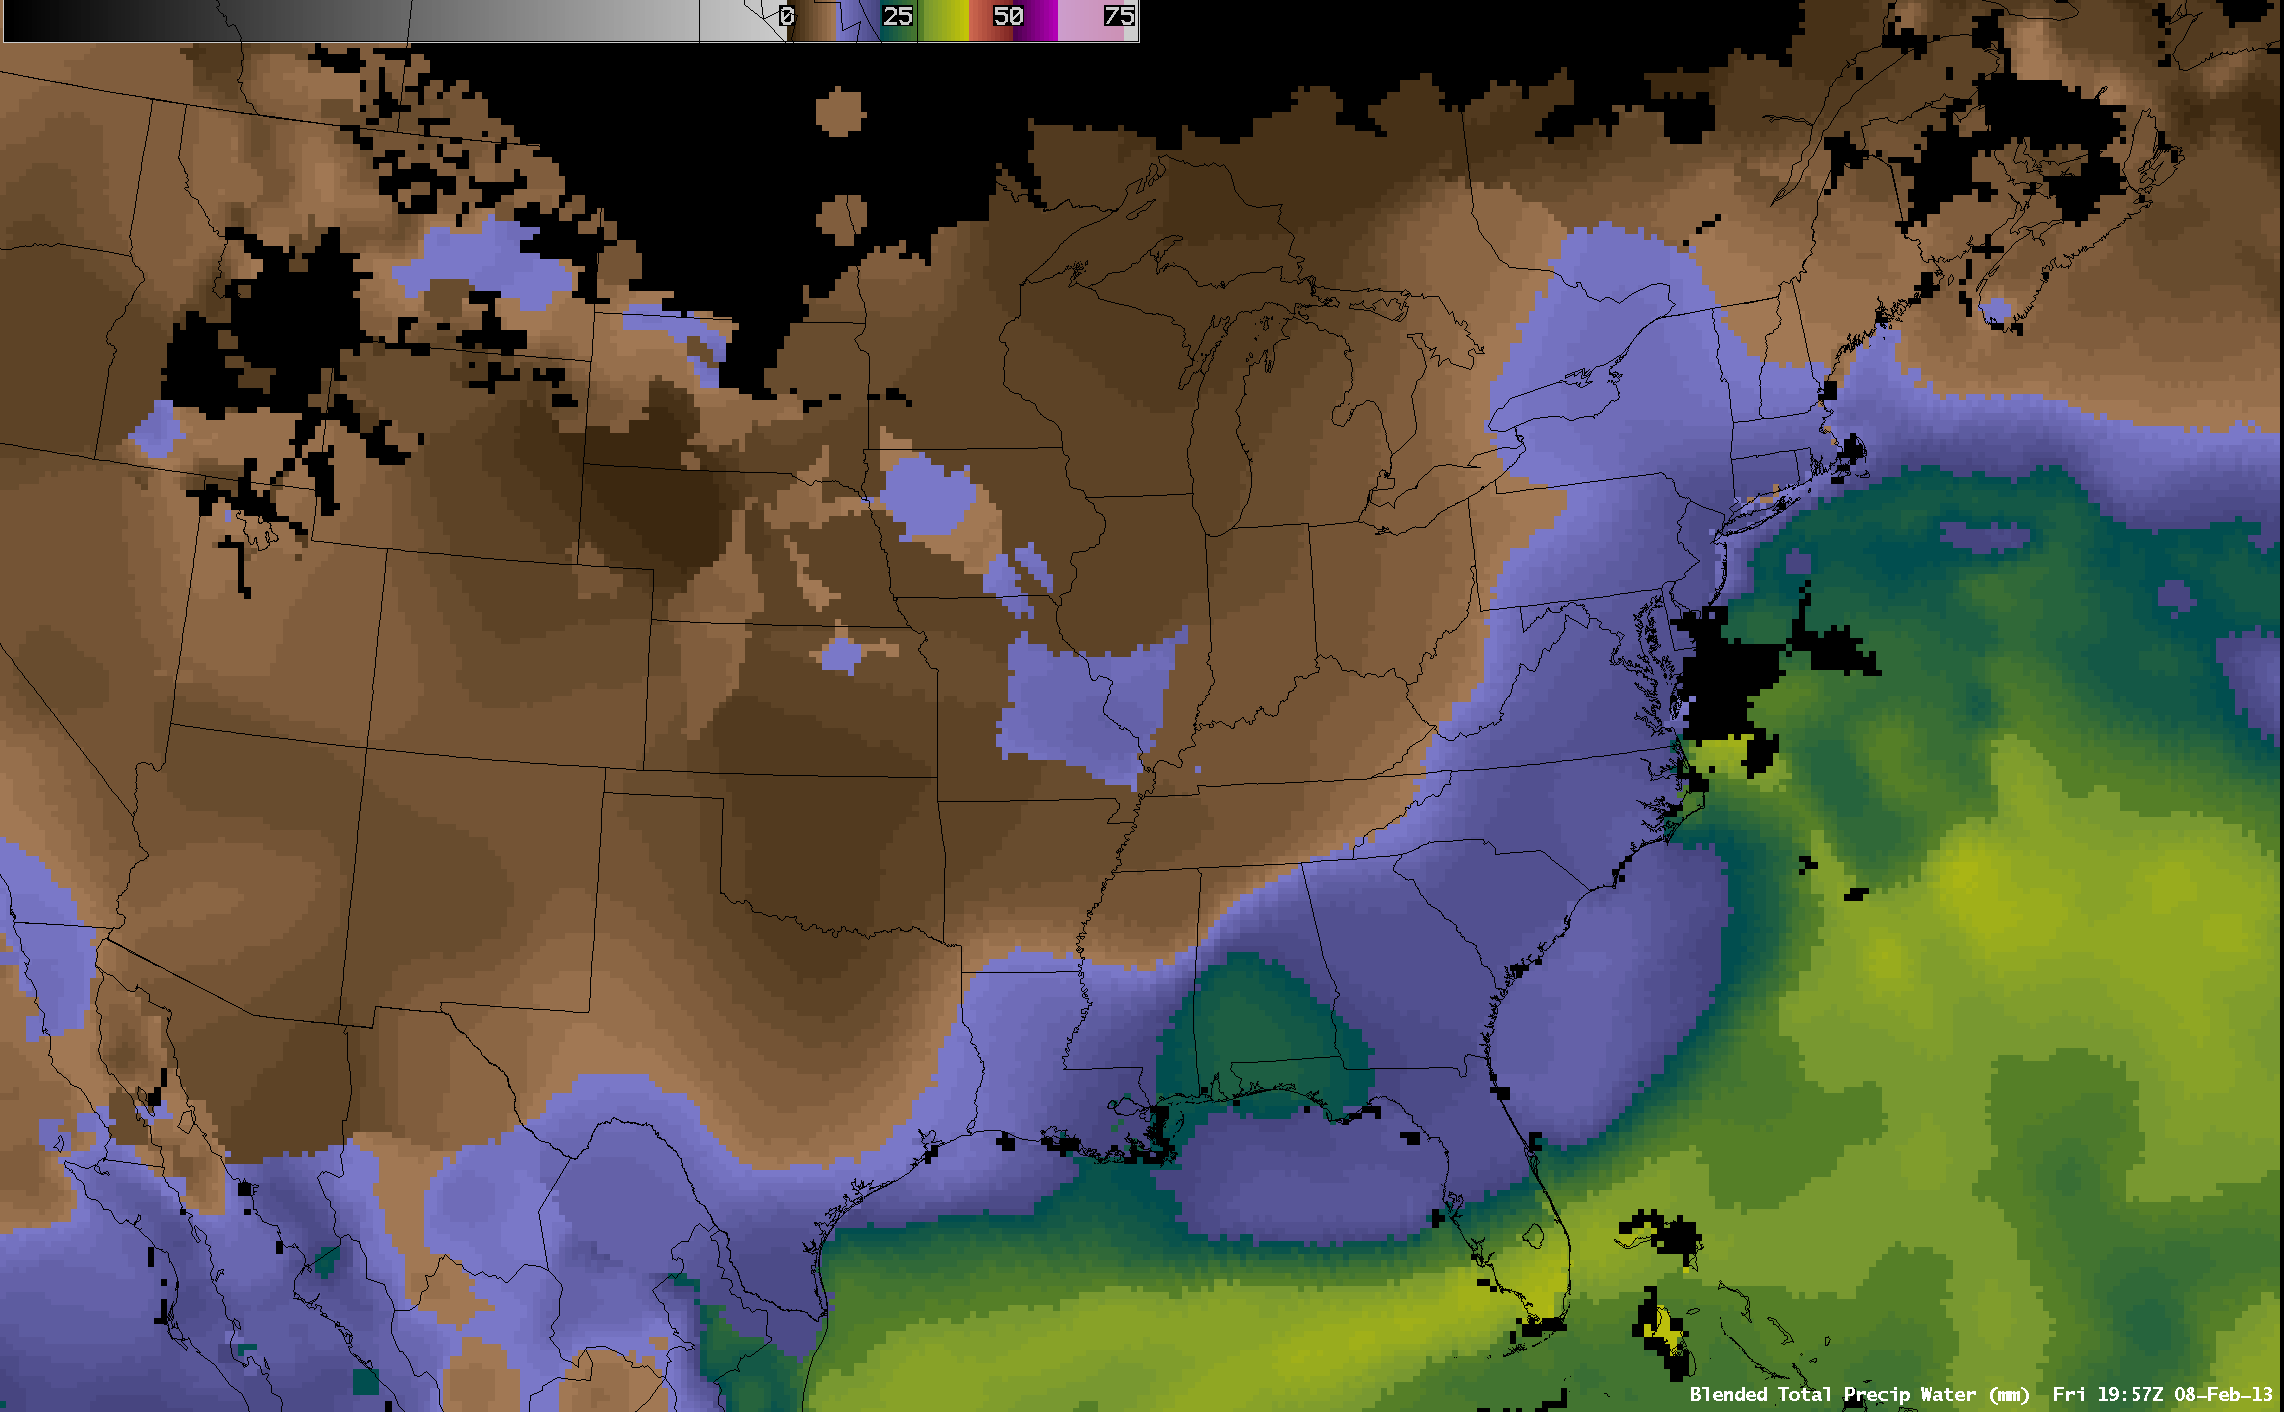 Blended Total Precipitable Water product (click image to play animation)